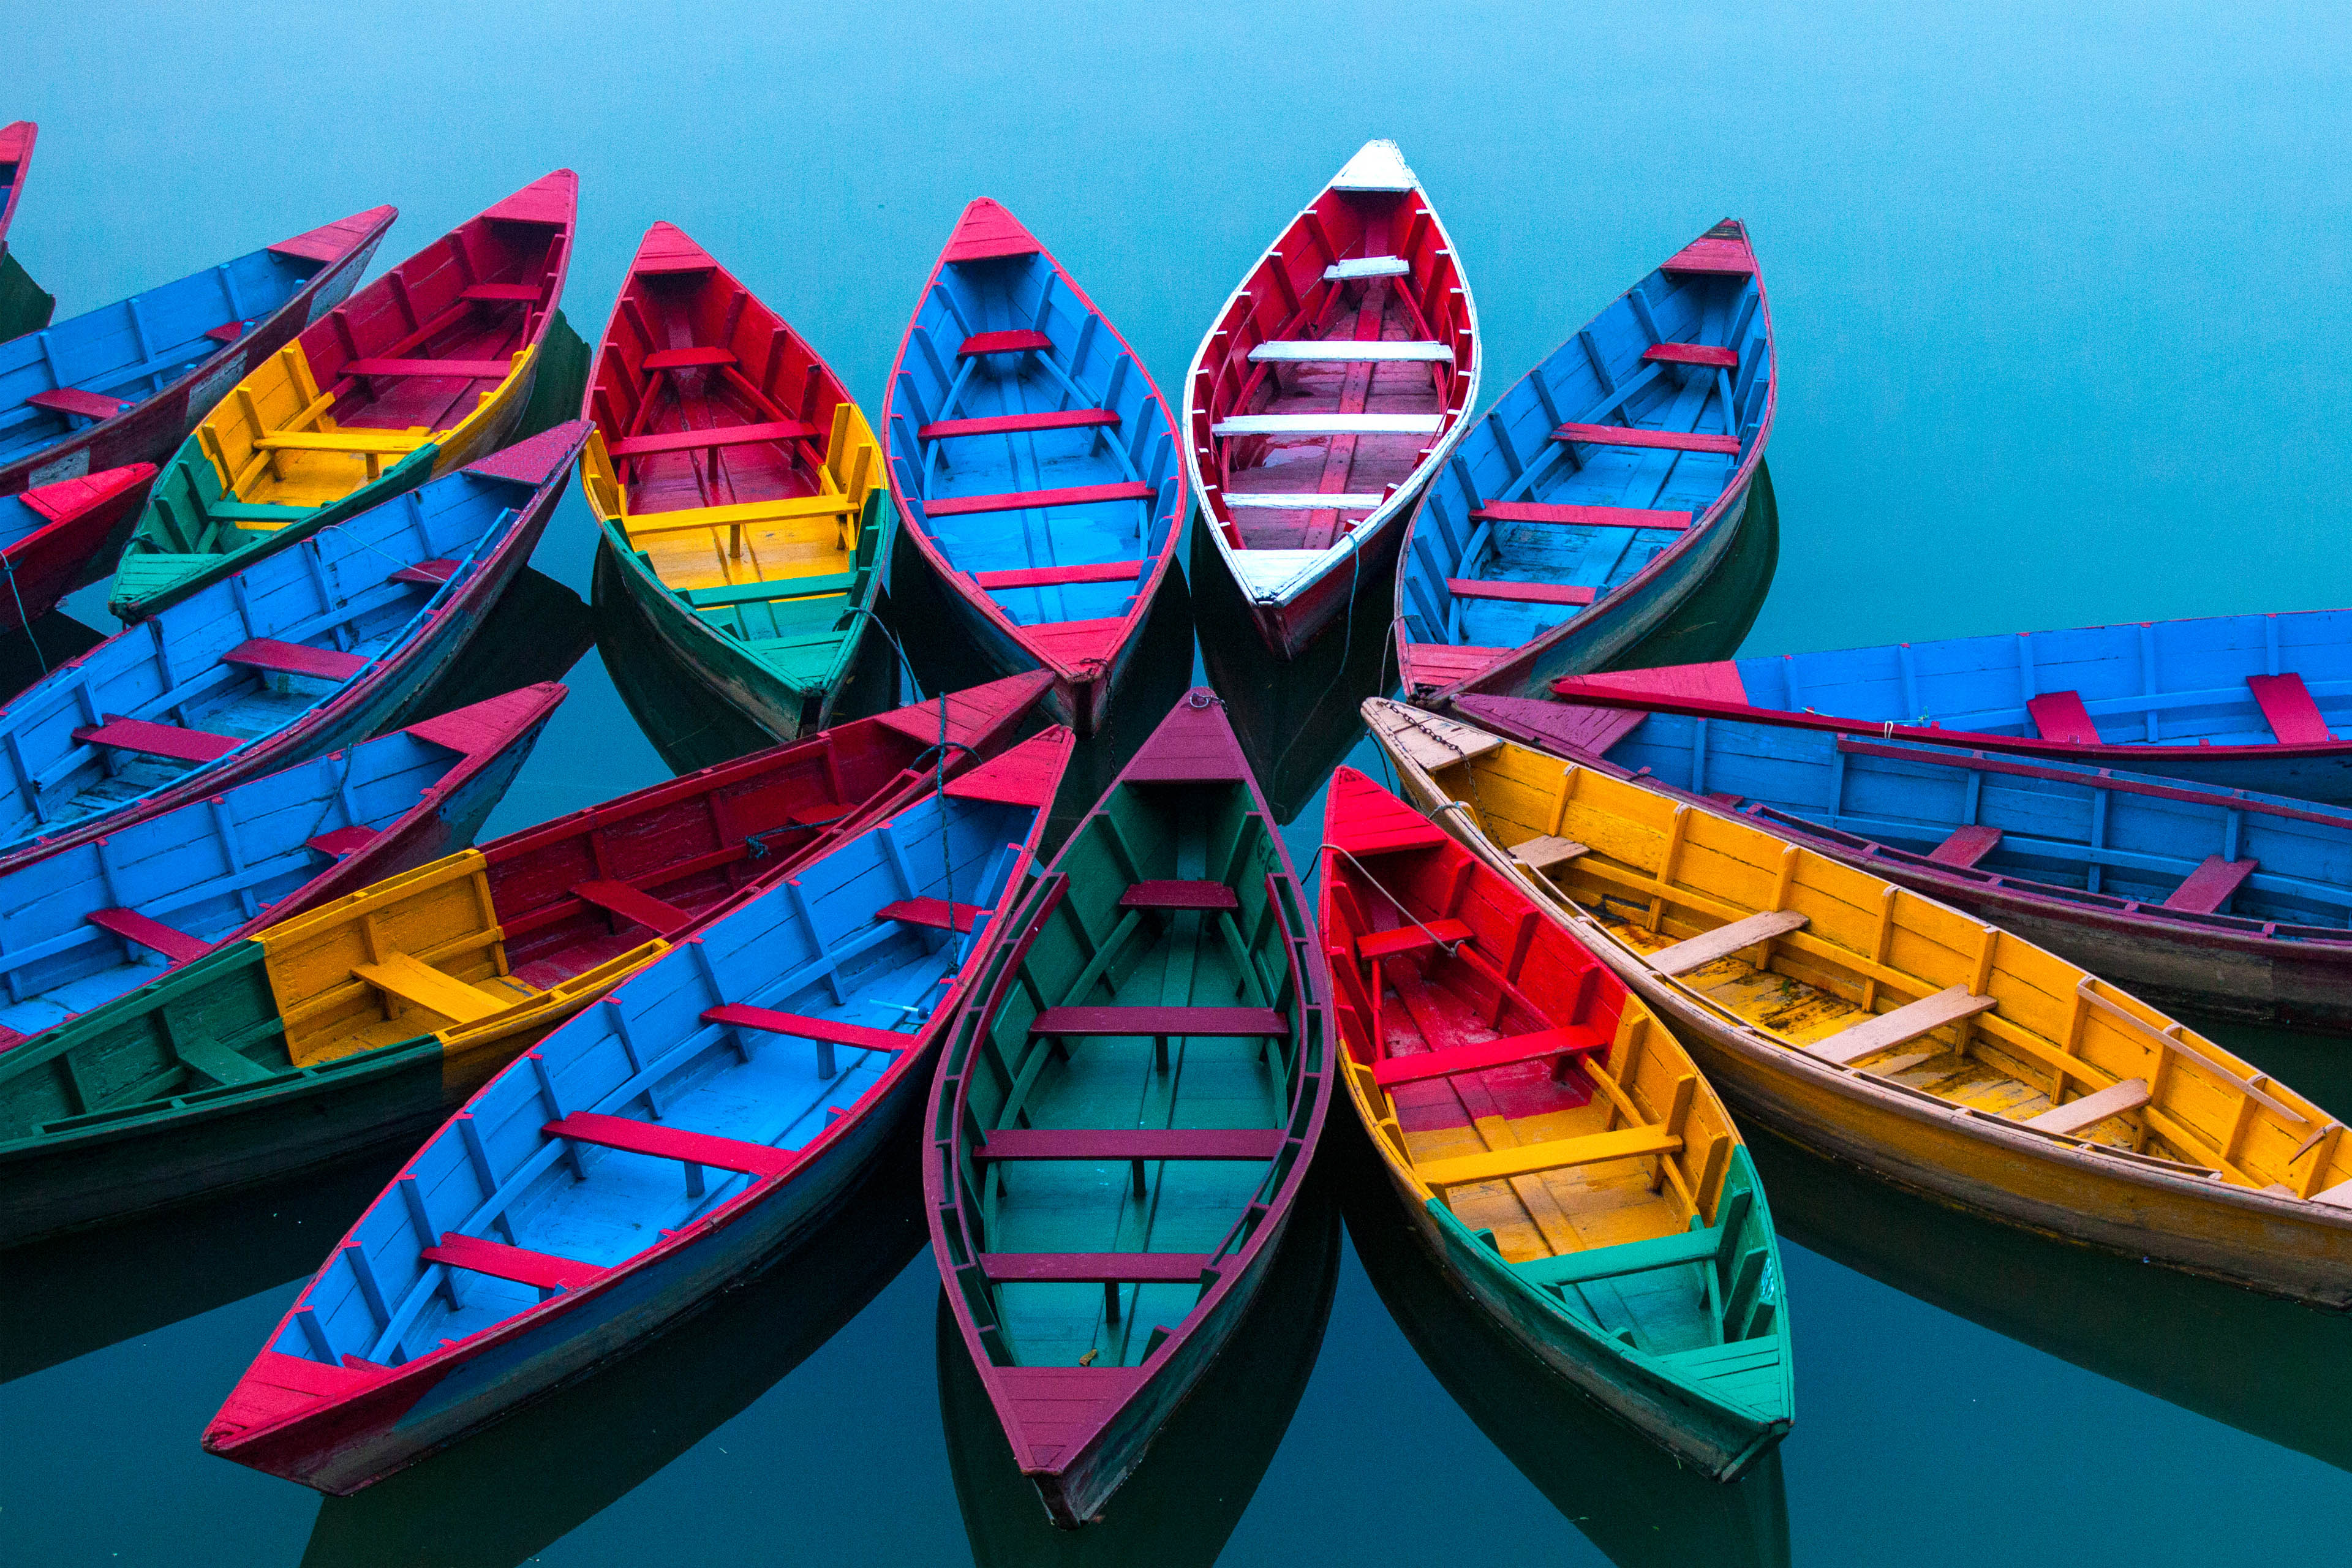 A group of colourful boats